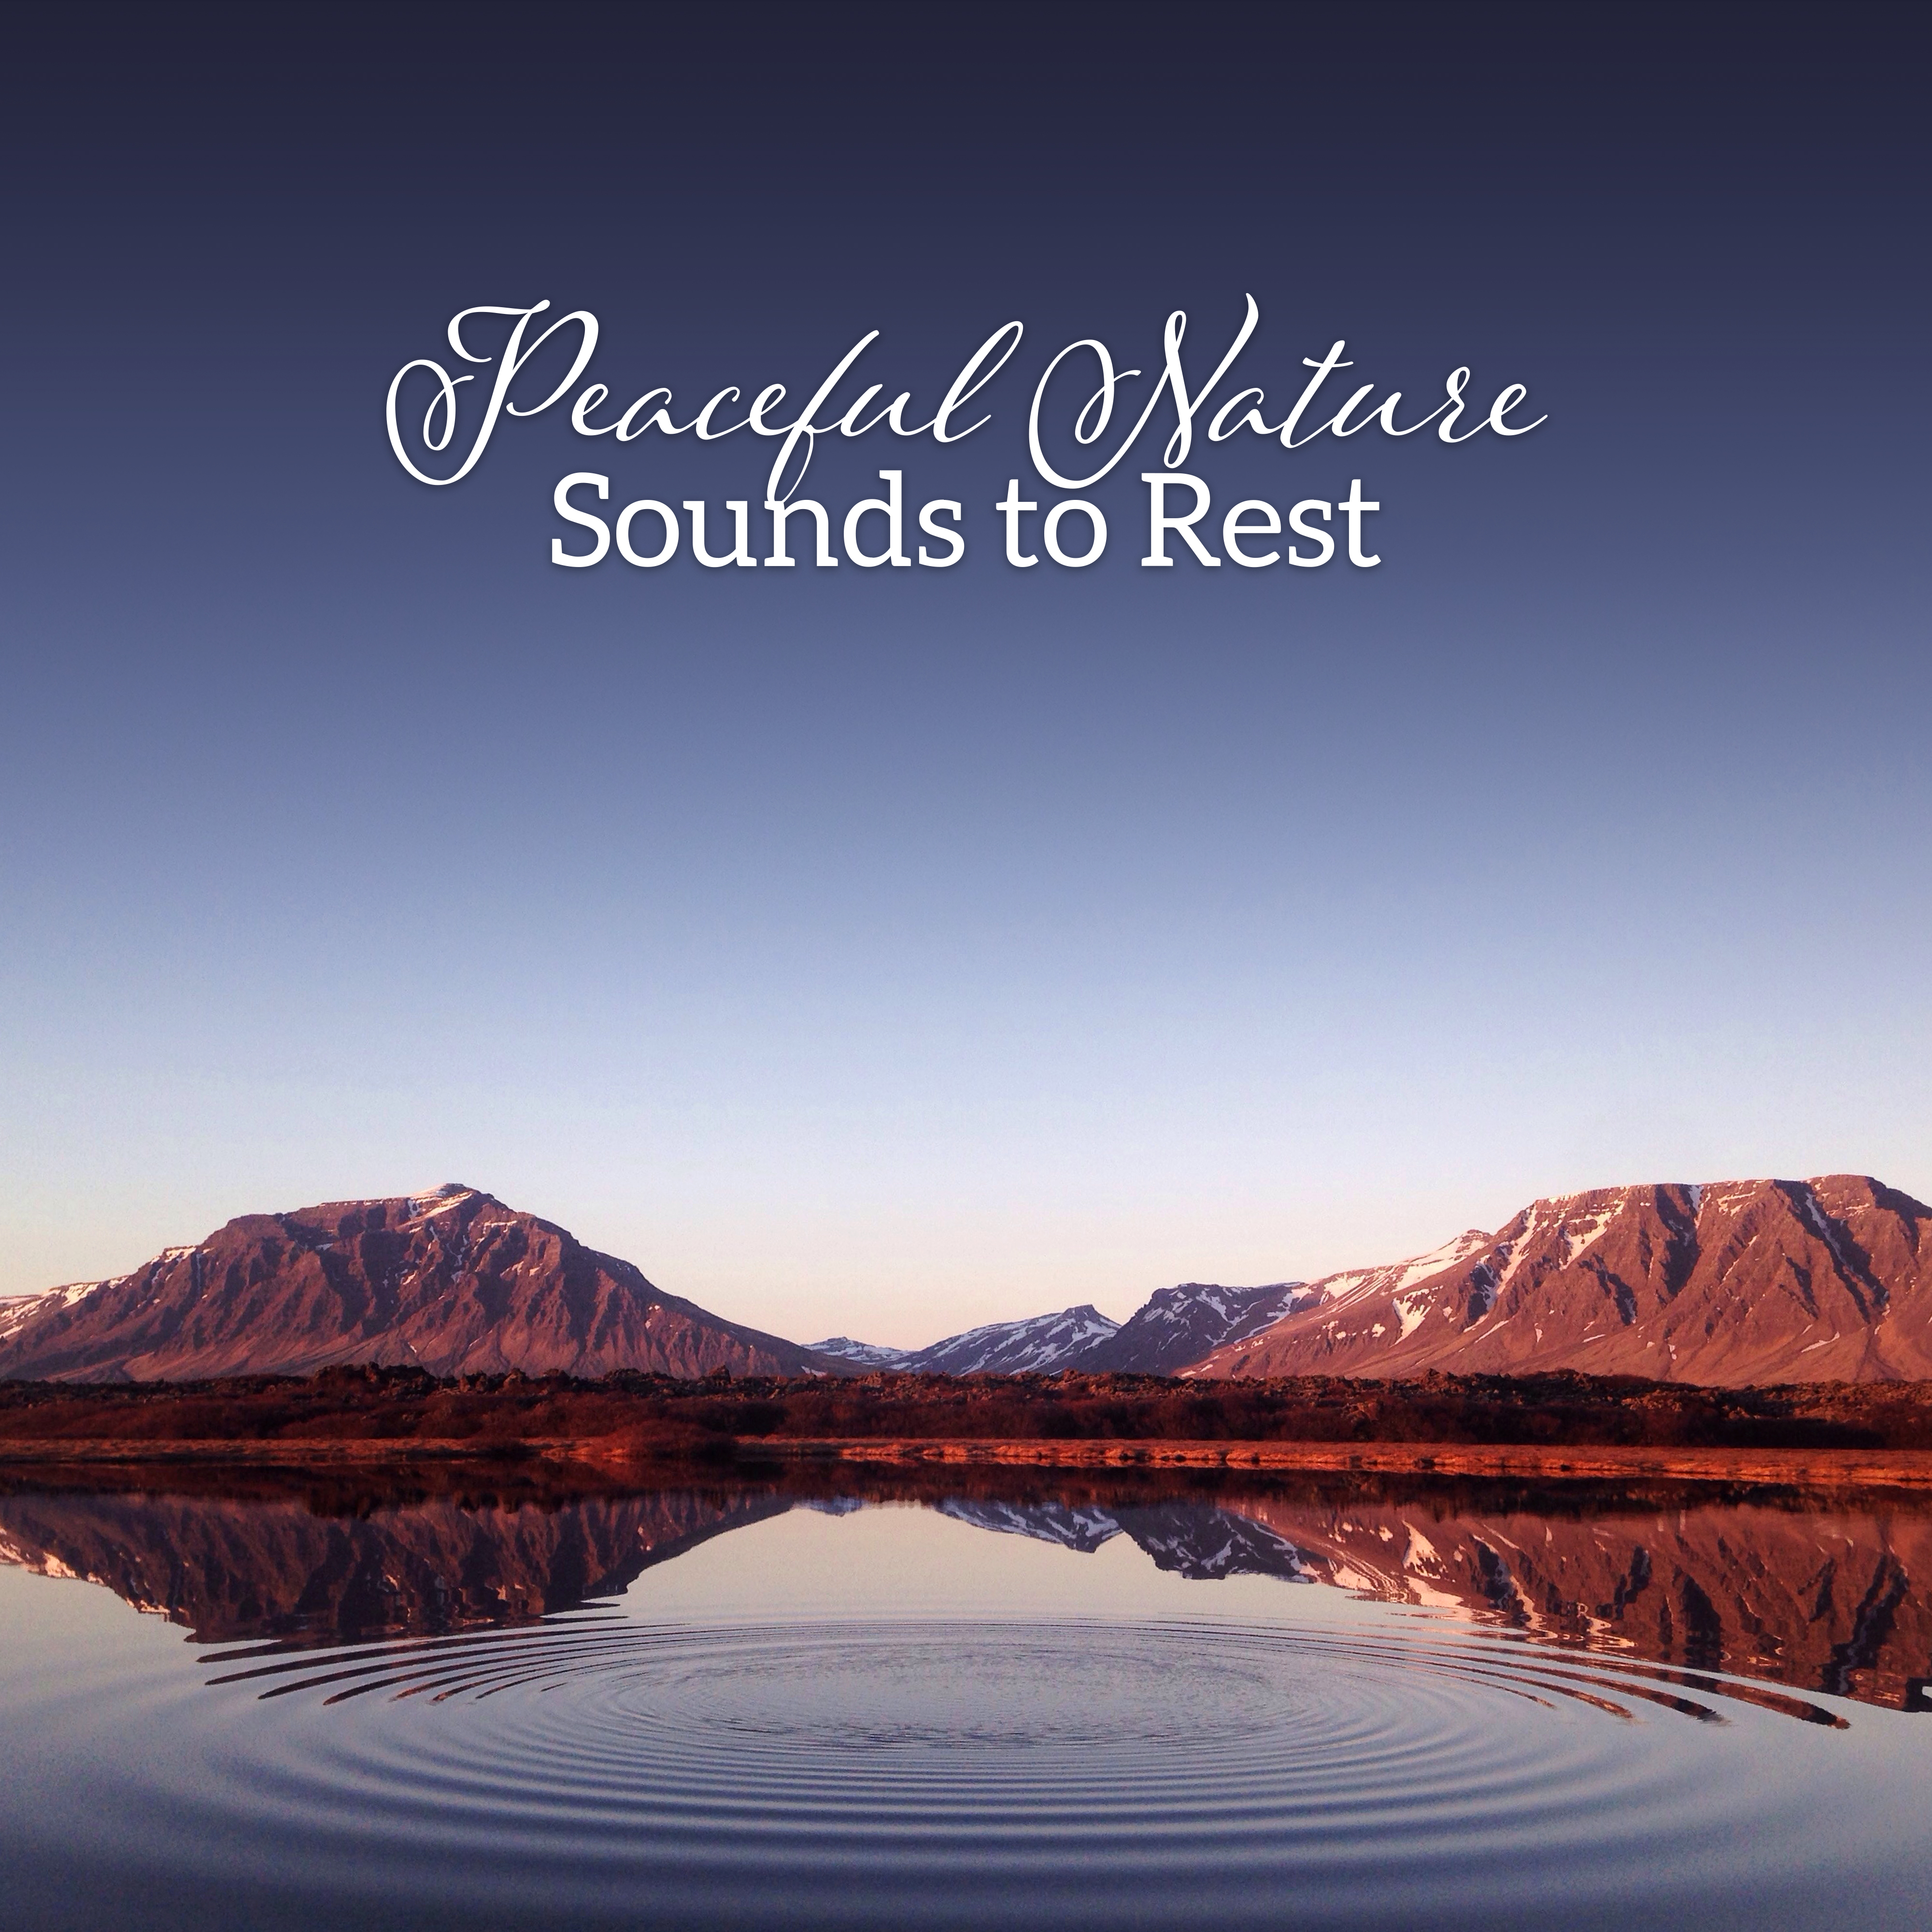 Peaceful Nature Sounds to Rest  Easy Listening, Nature Waves, Healing Sounds of New Age, Stress Relief, Calm Down with Soft Melodies